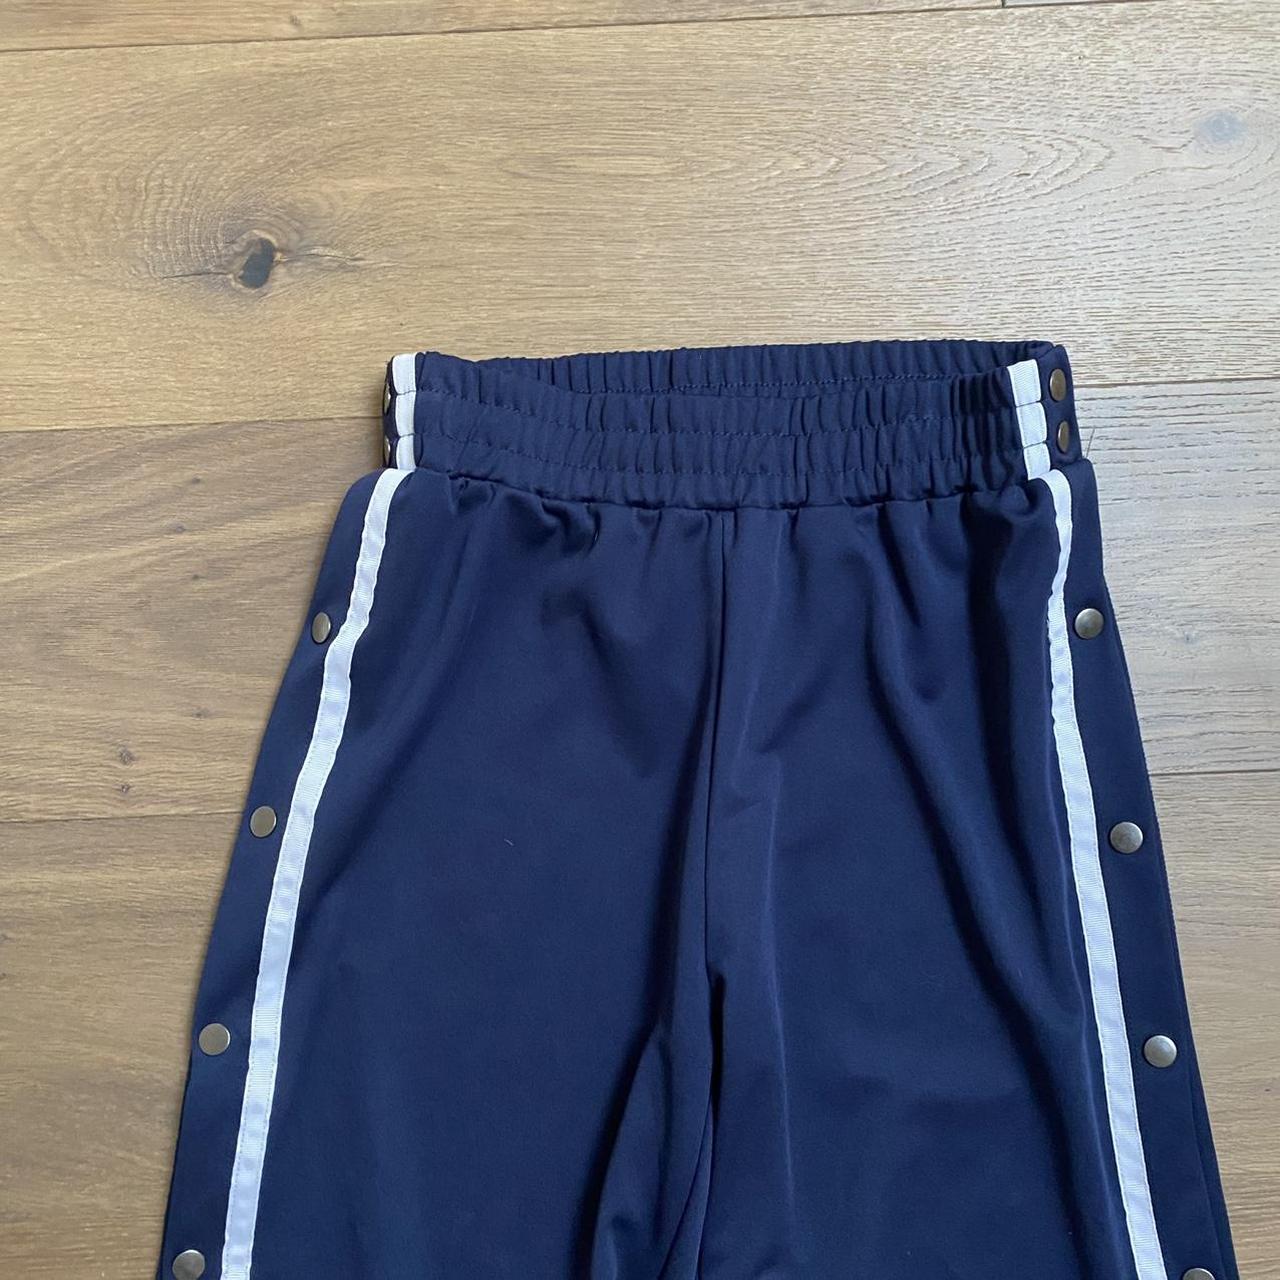 Women's White and Navy Trousers | Depop